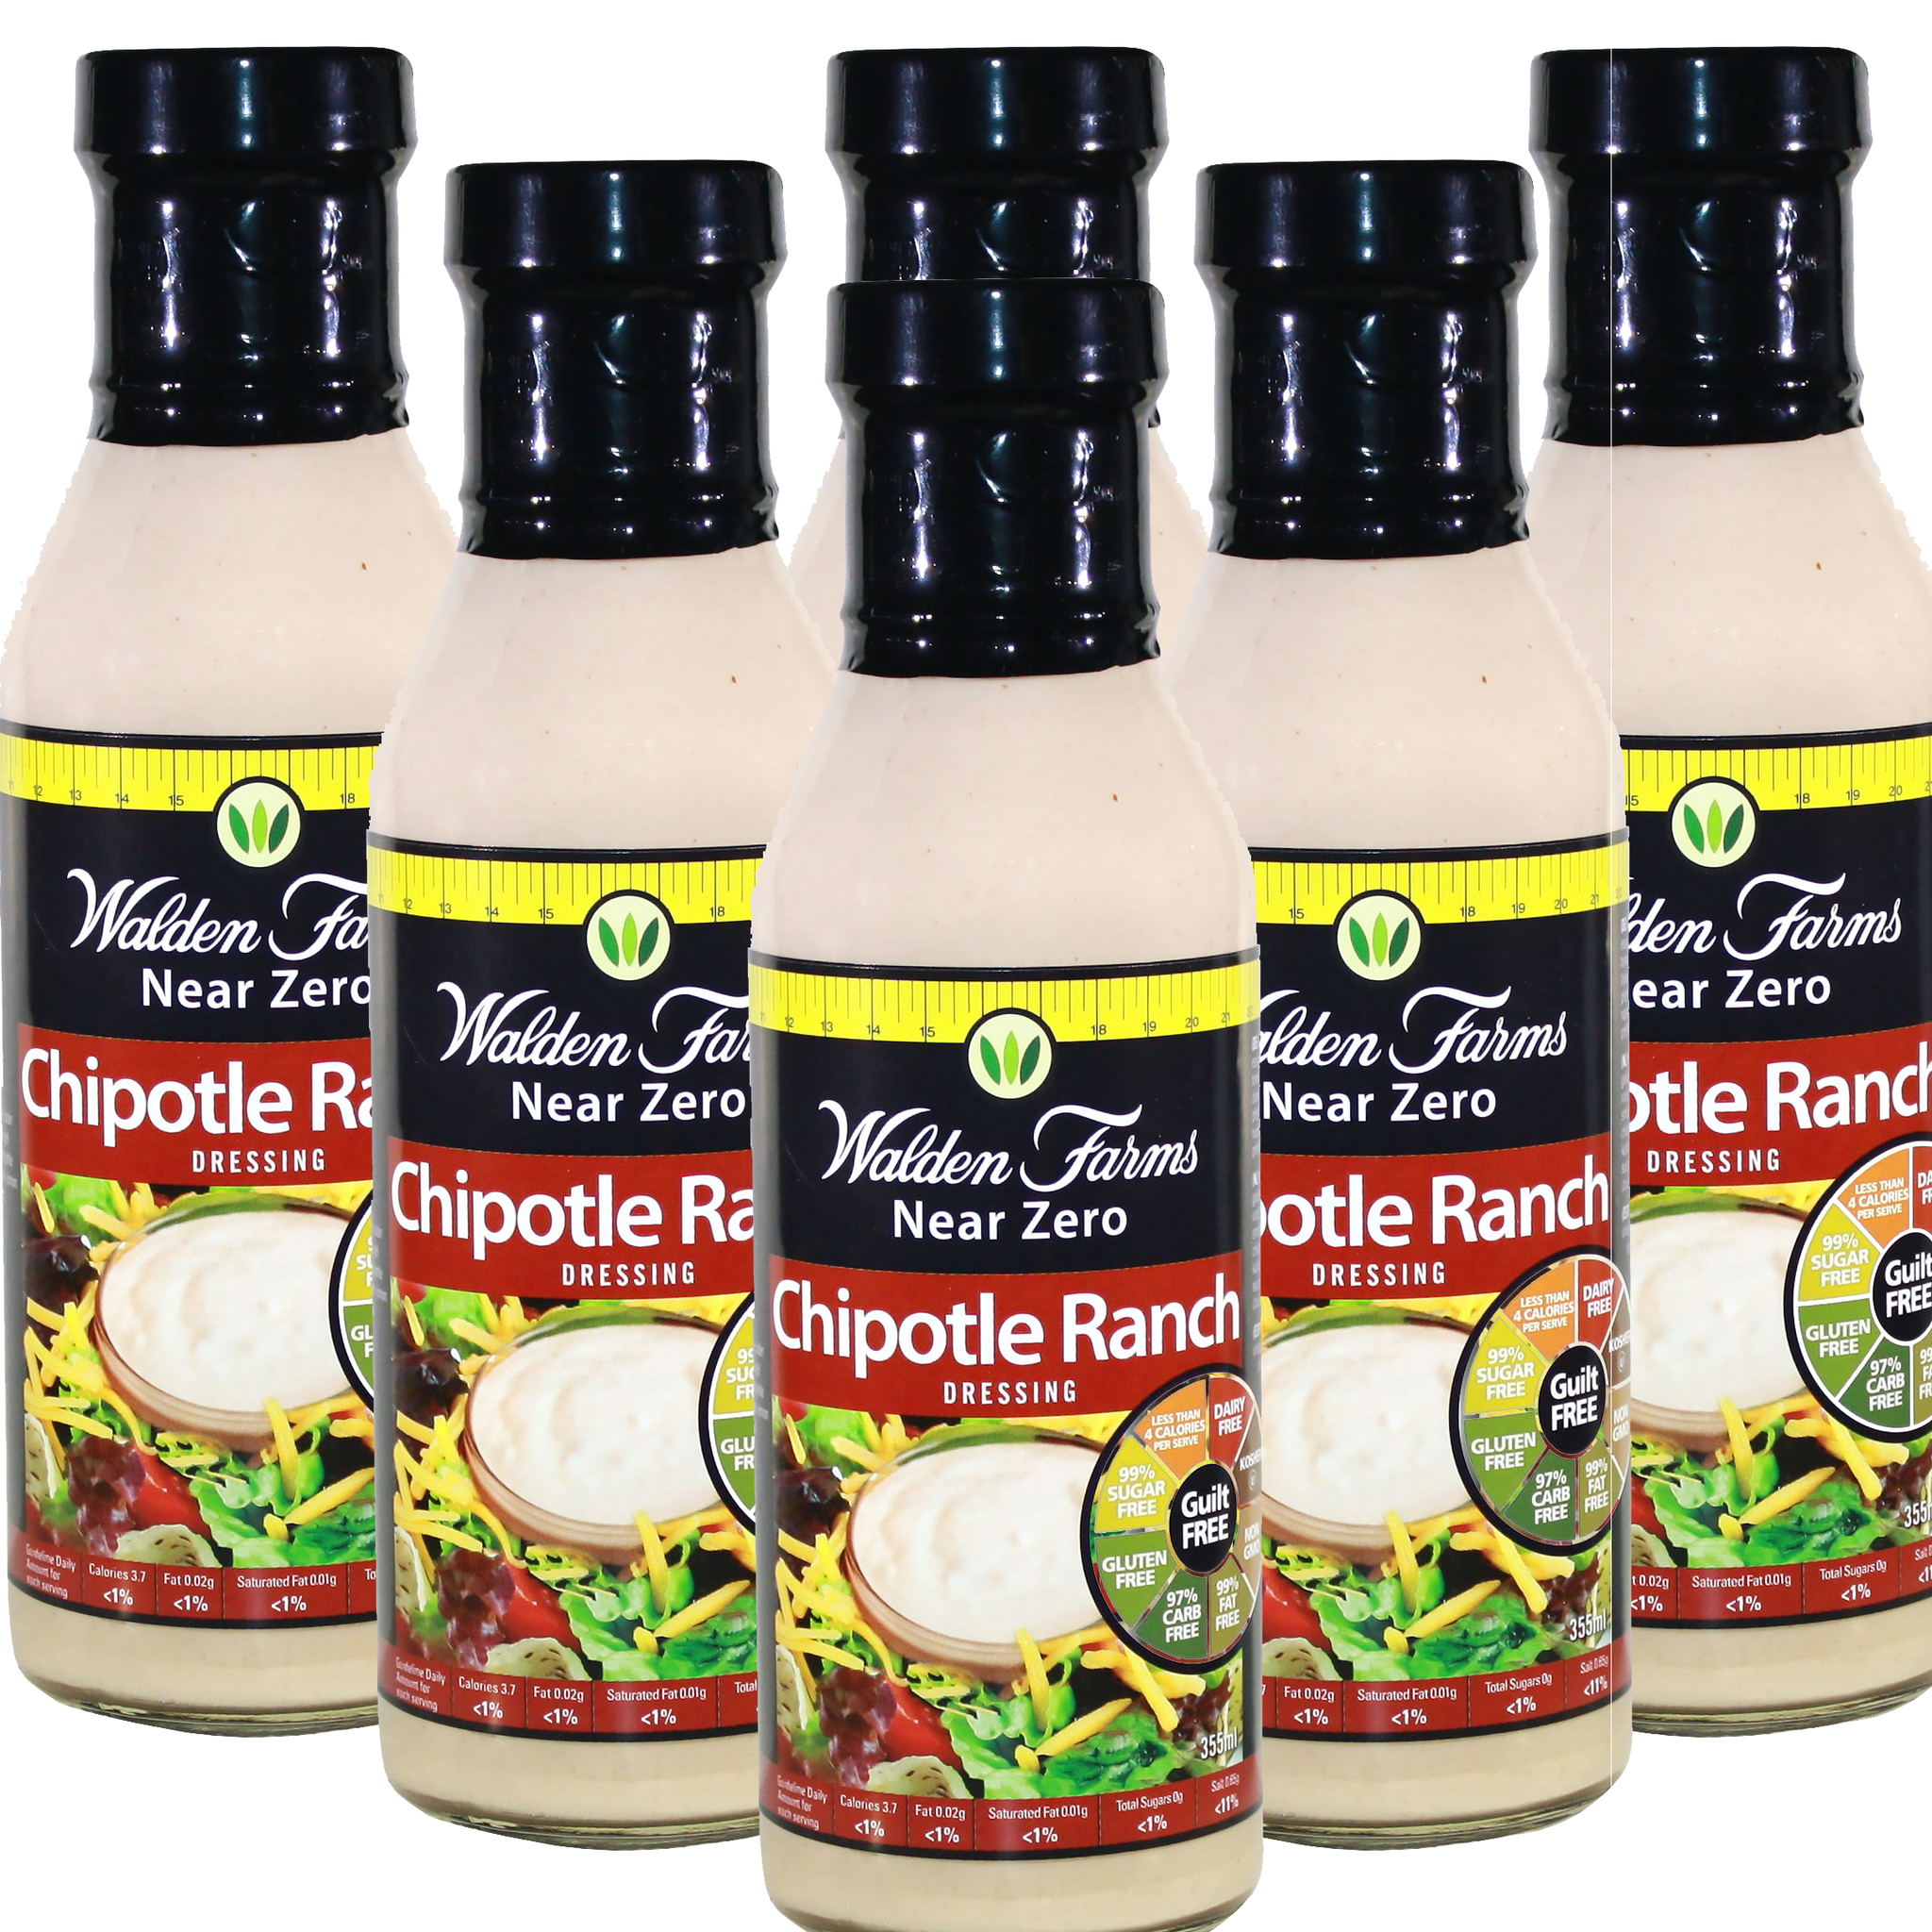 Gluten Free Chipotle Ranch Dressing with Near Zero Fats and Calories